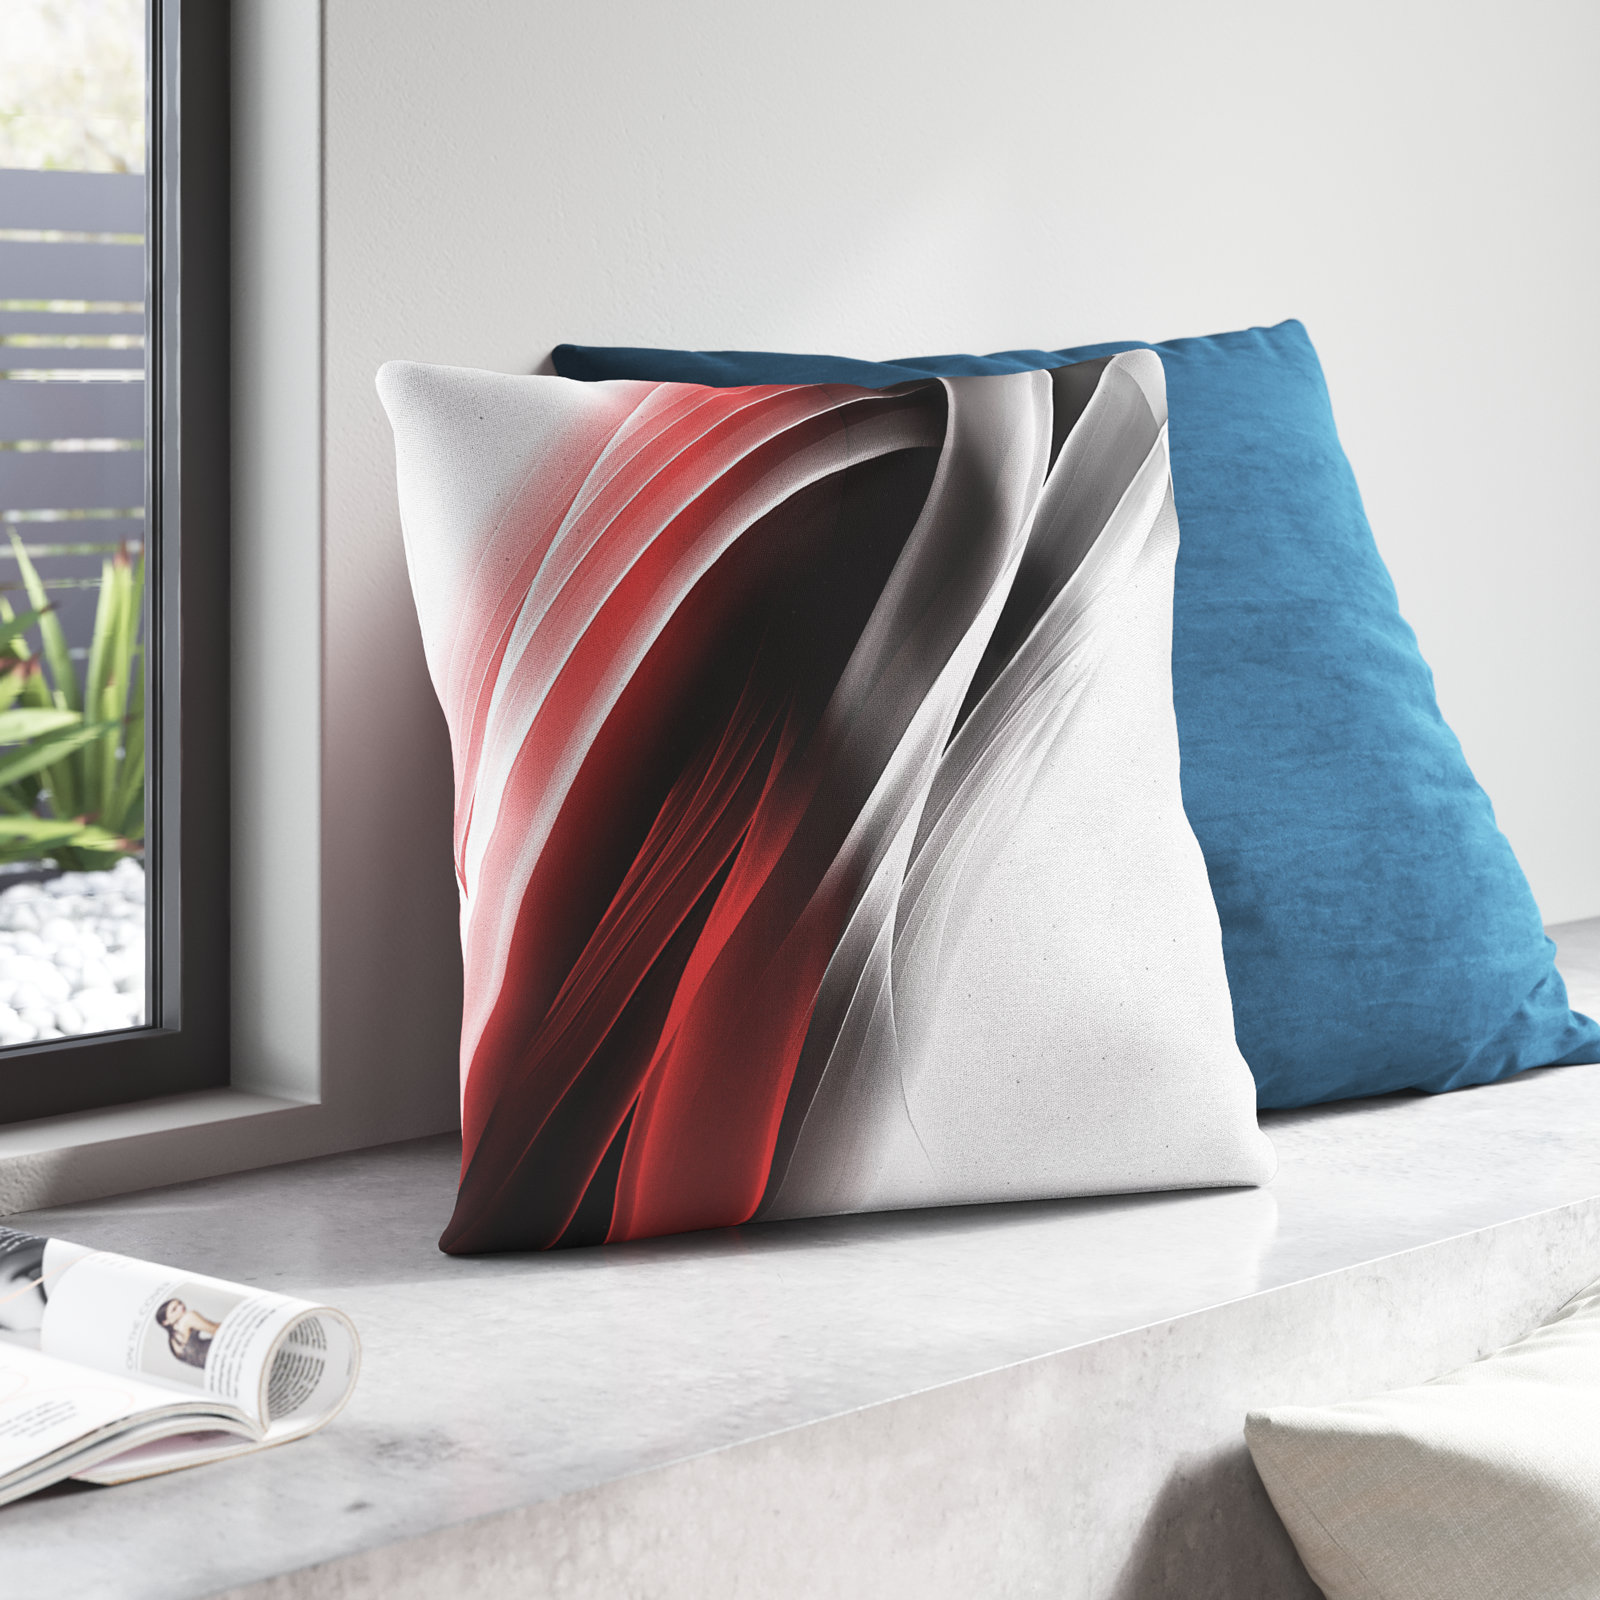 Red Square Pillow